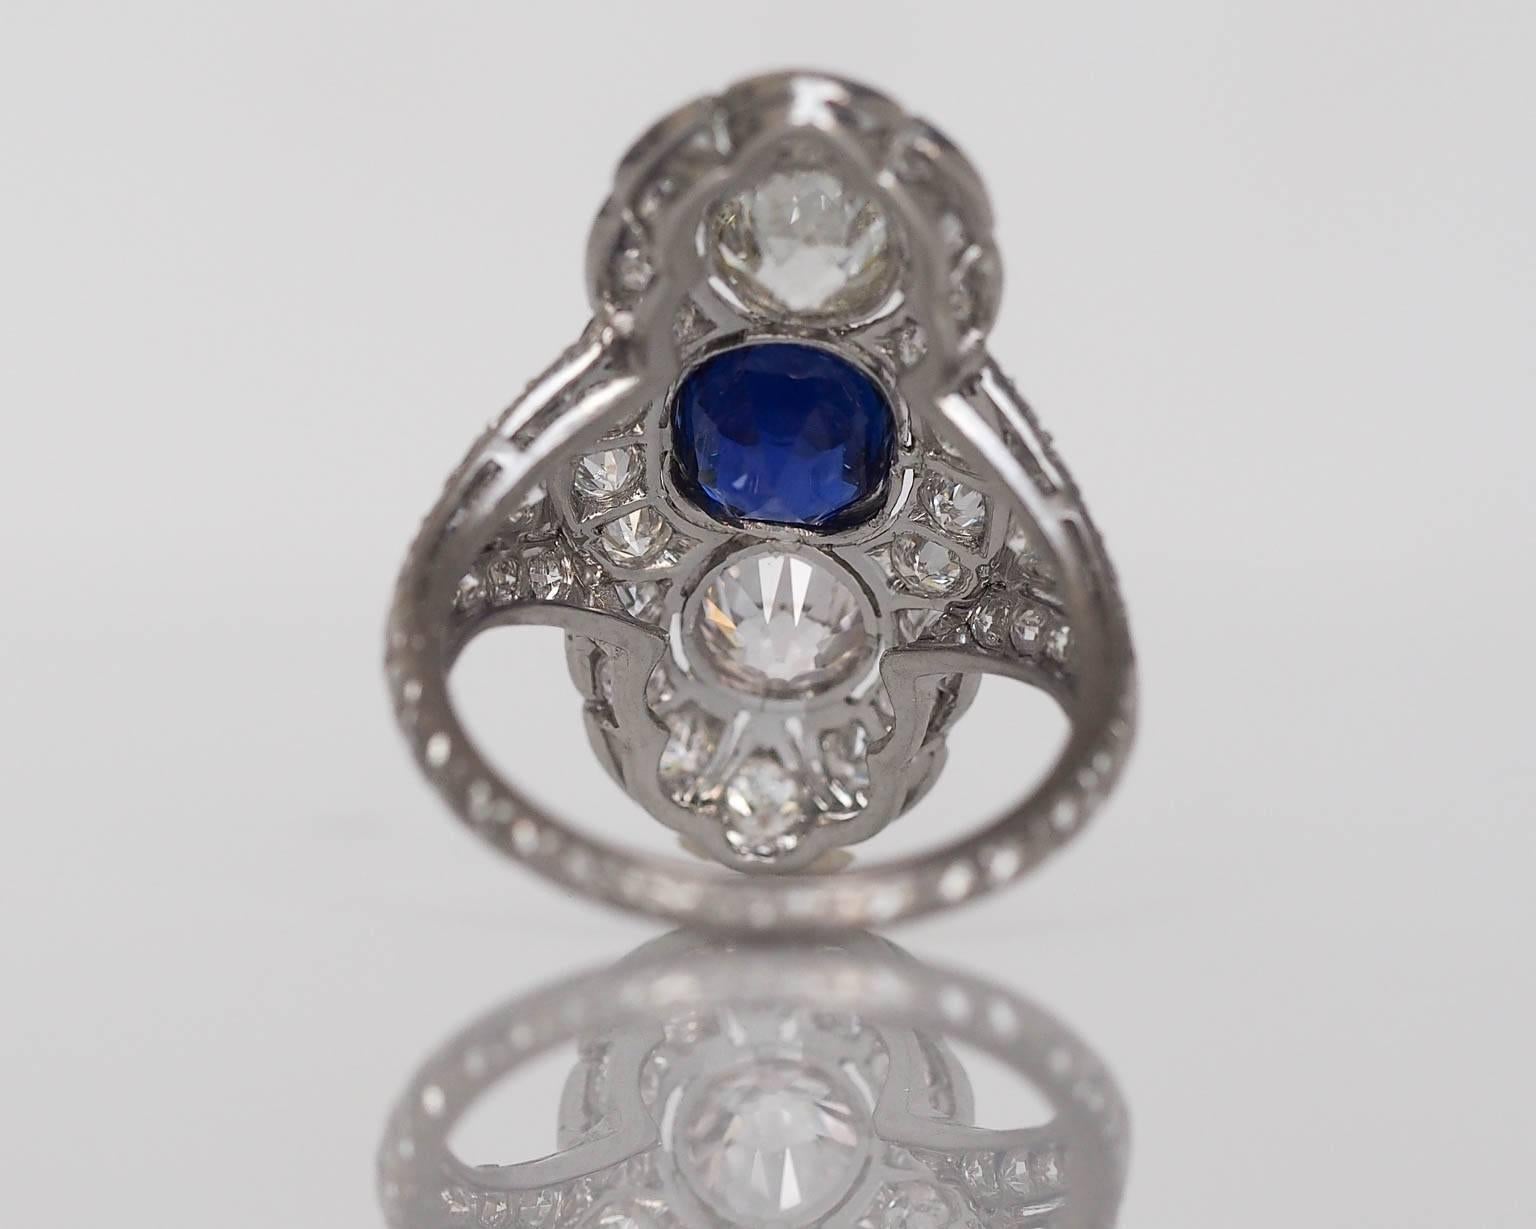 A true work of art. This is a one of a kind piece, and it features on of the rarest gemstones known to mankind. The center sapphire is a AGL certified Kashmir origin, with no treatment or enhancement whatsoever. The stone is VVS clean, and is a